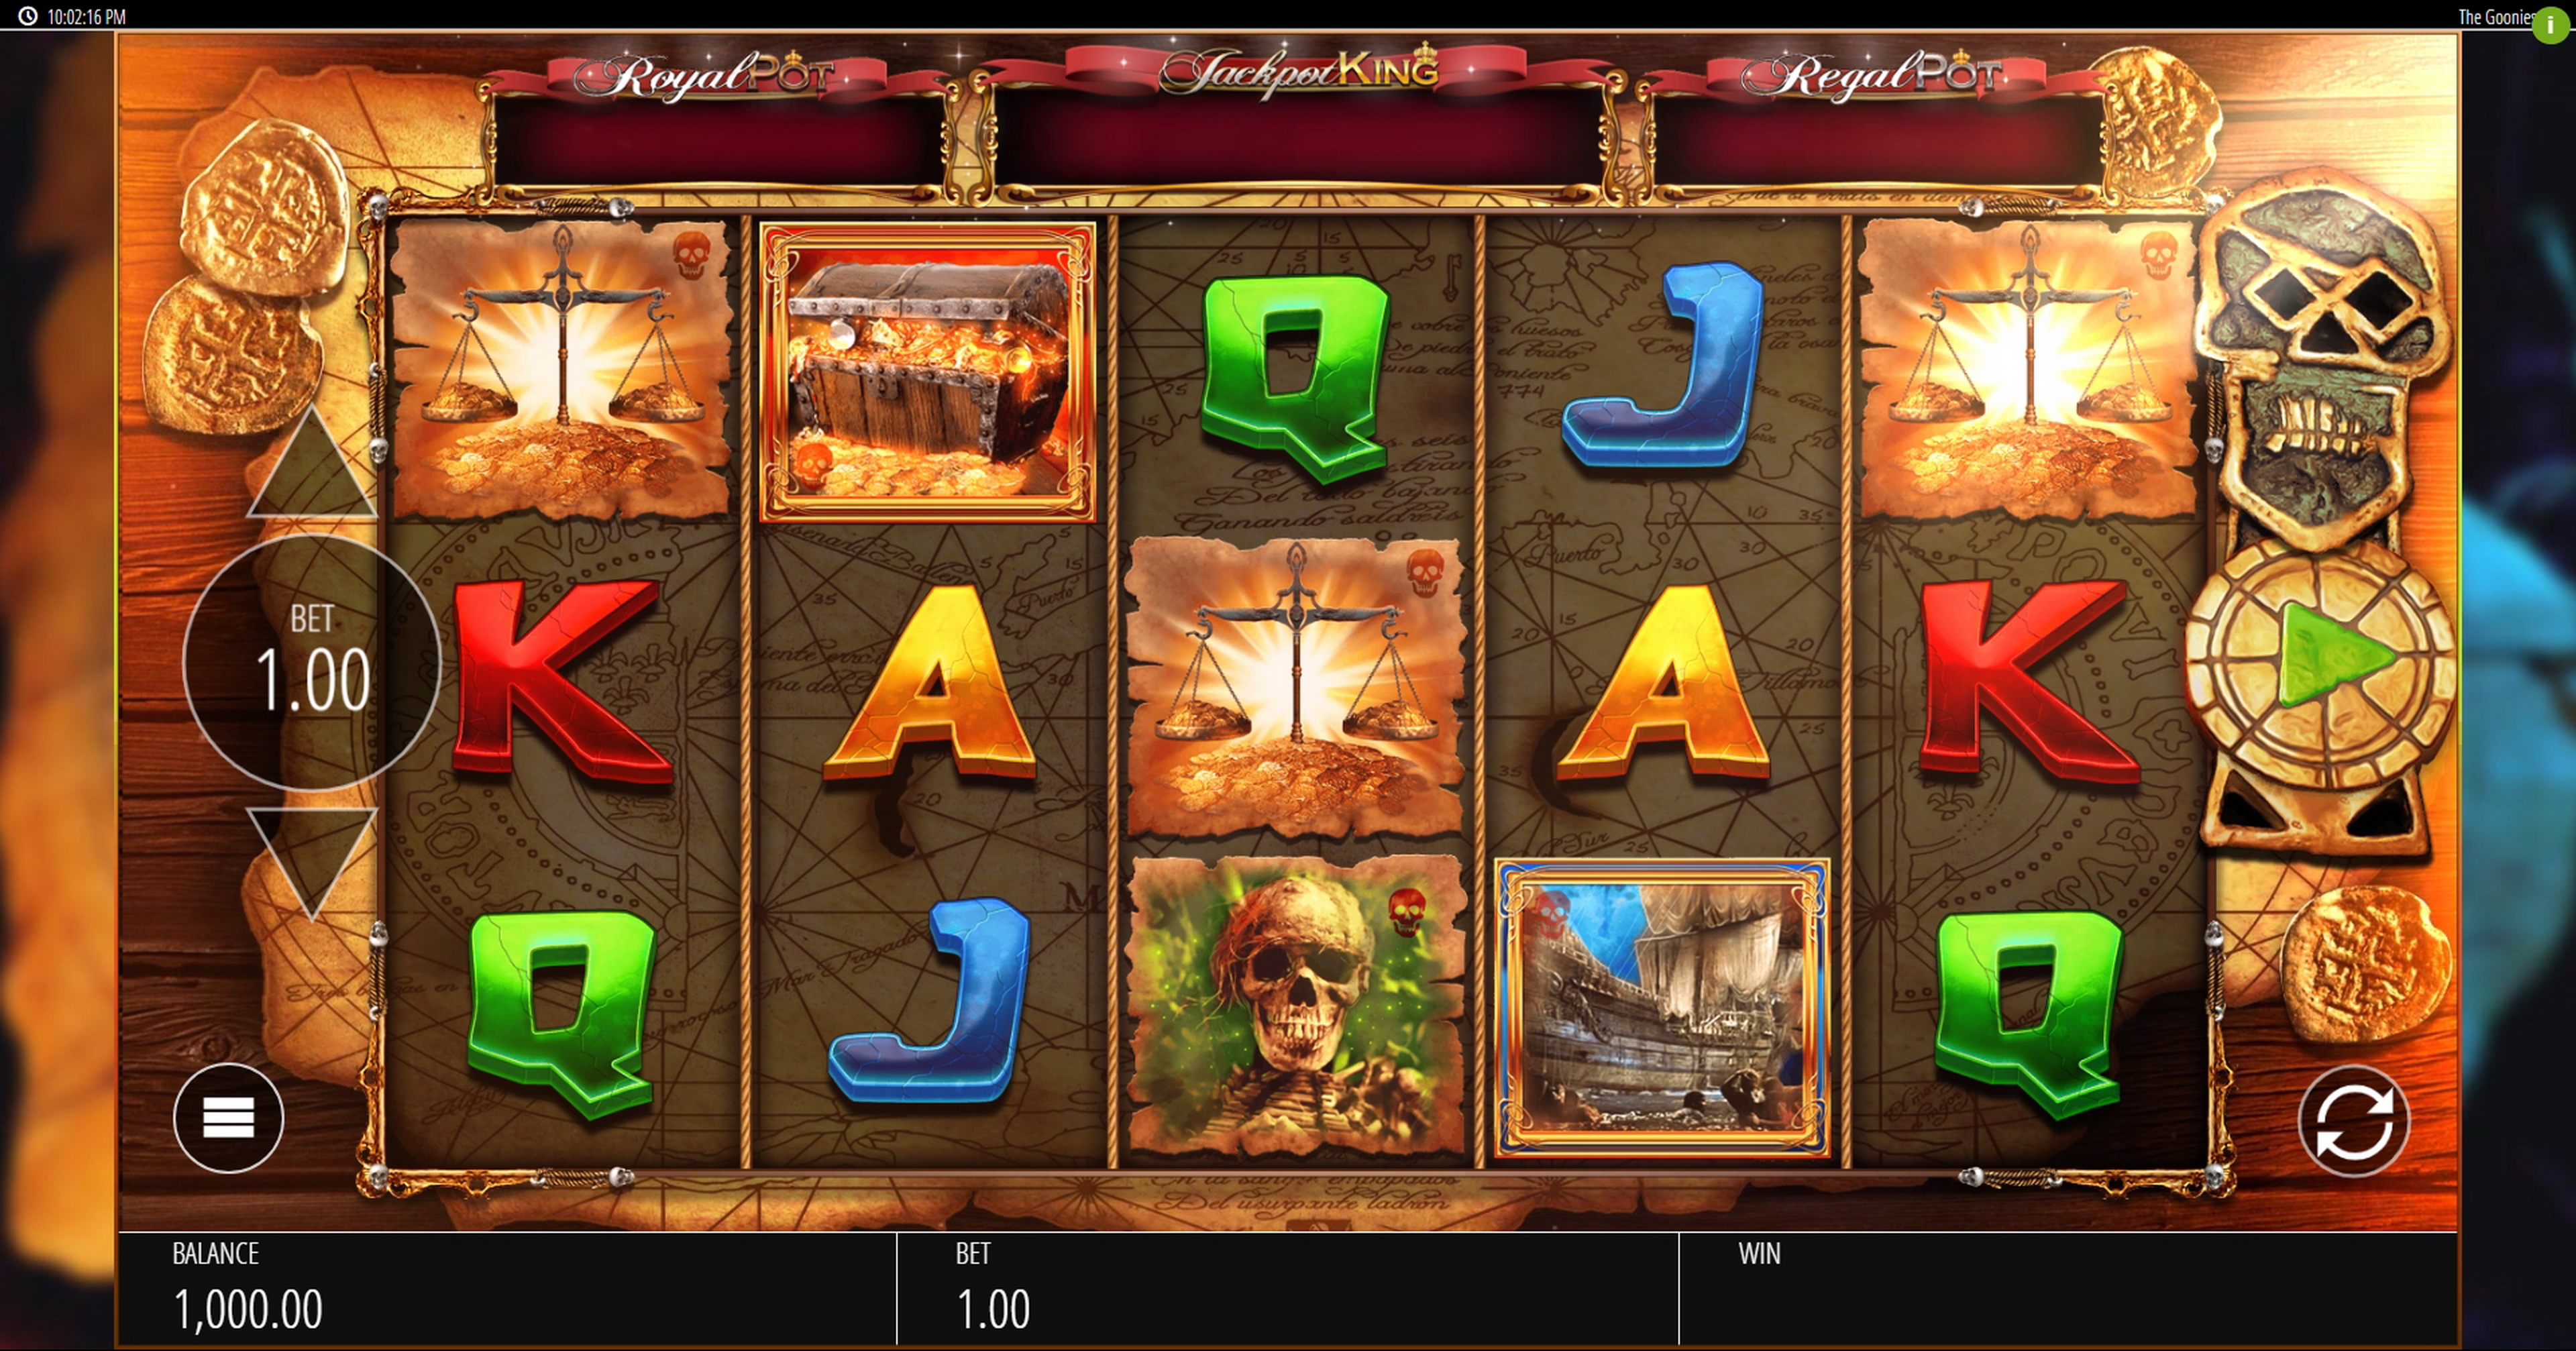 Reels in The Goonies Jackpot King Slot Game by Blueprint Gaming